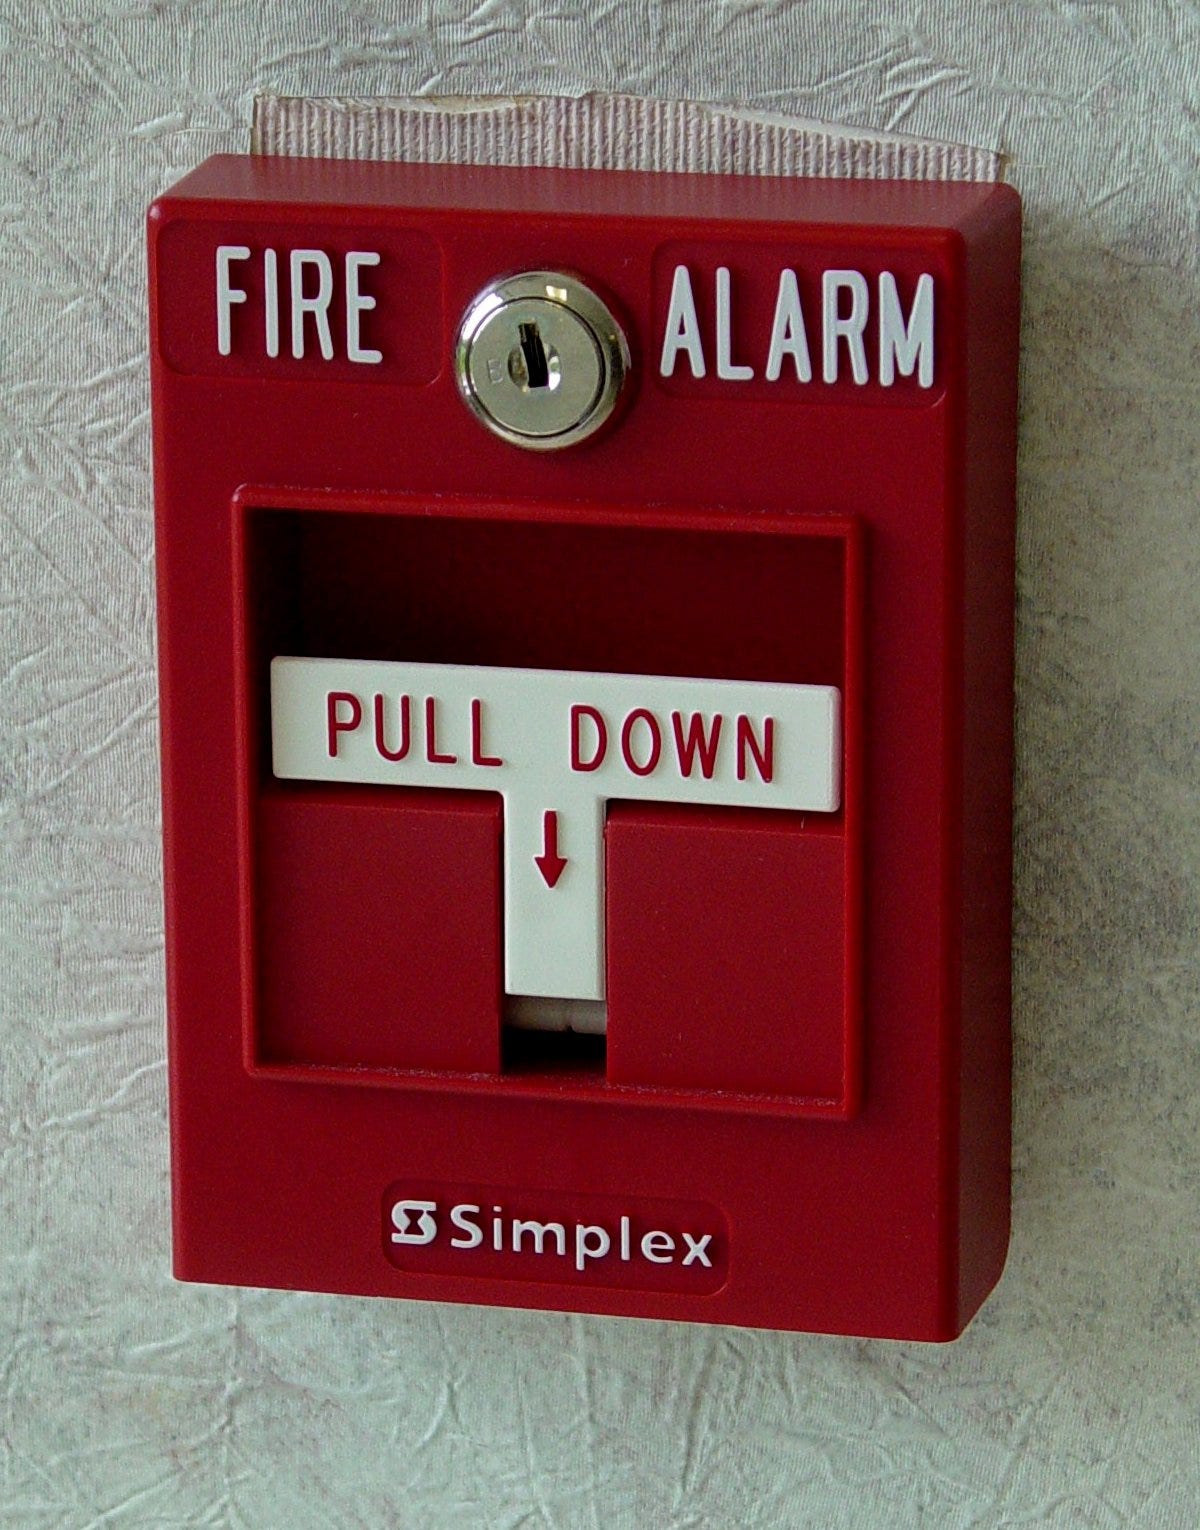 Manual fire alarm activation - Wikipedia